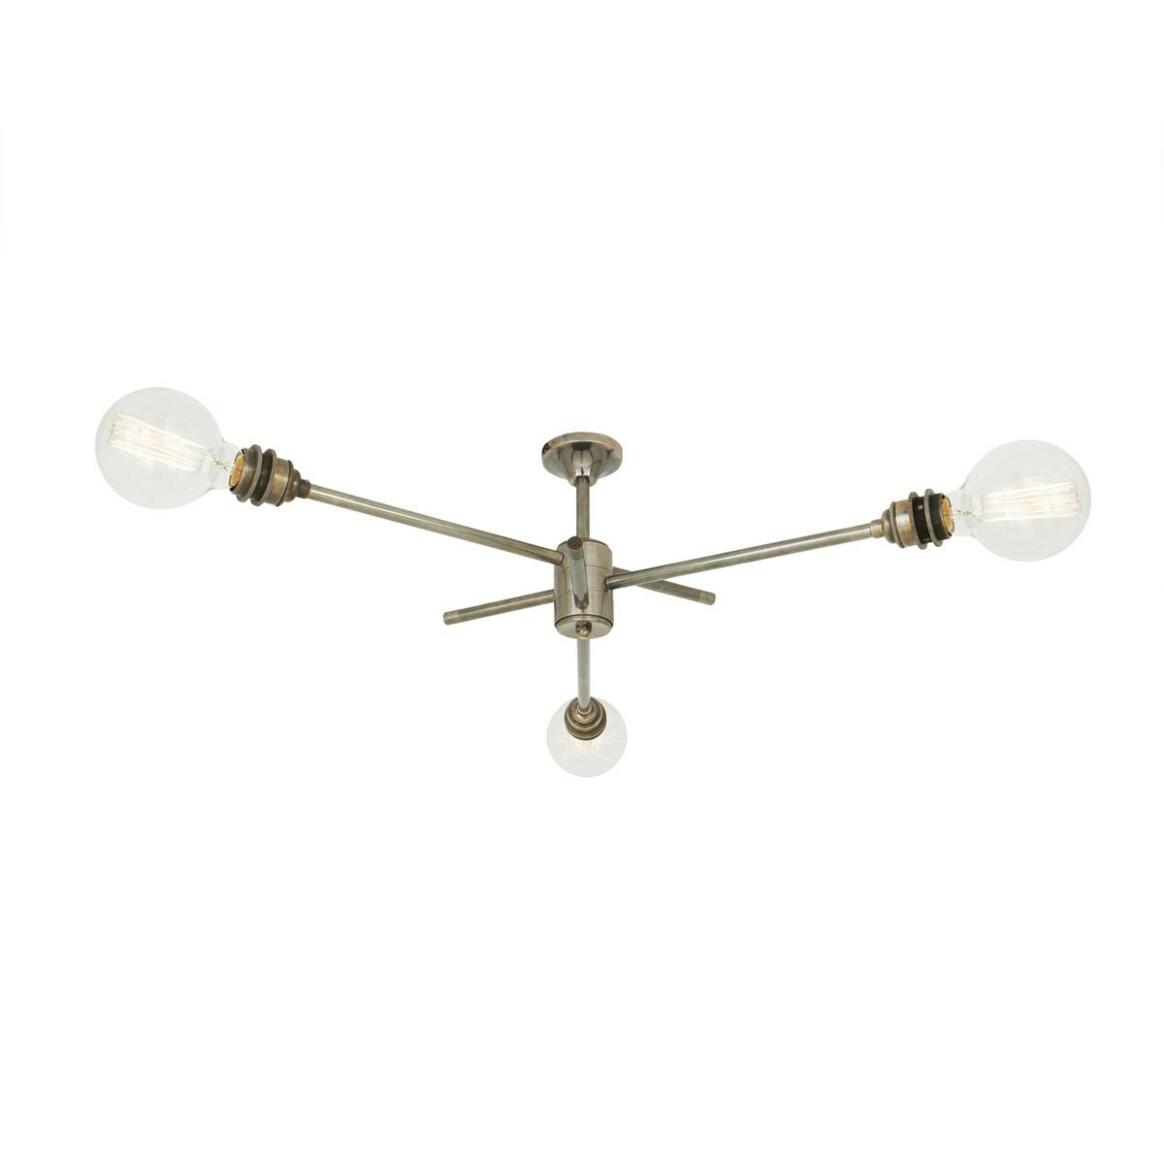 Mombasa Industrial Flush Chandelier, Three-Arm main product image